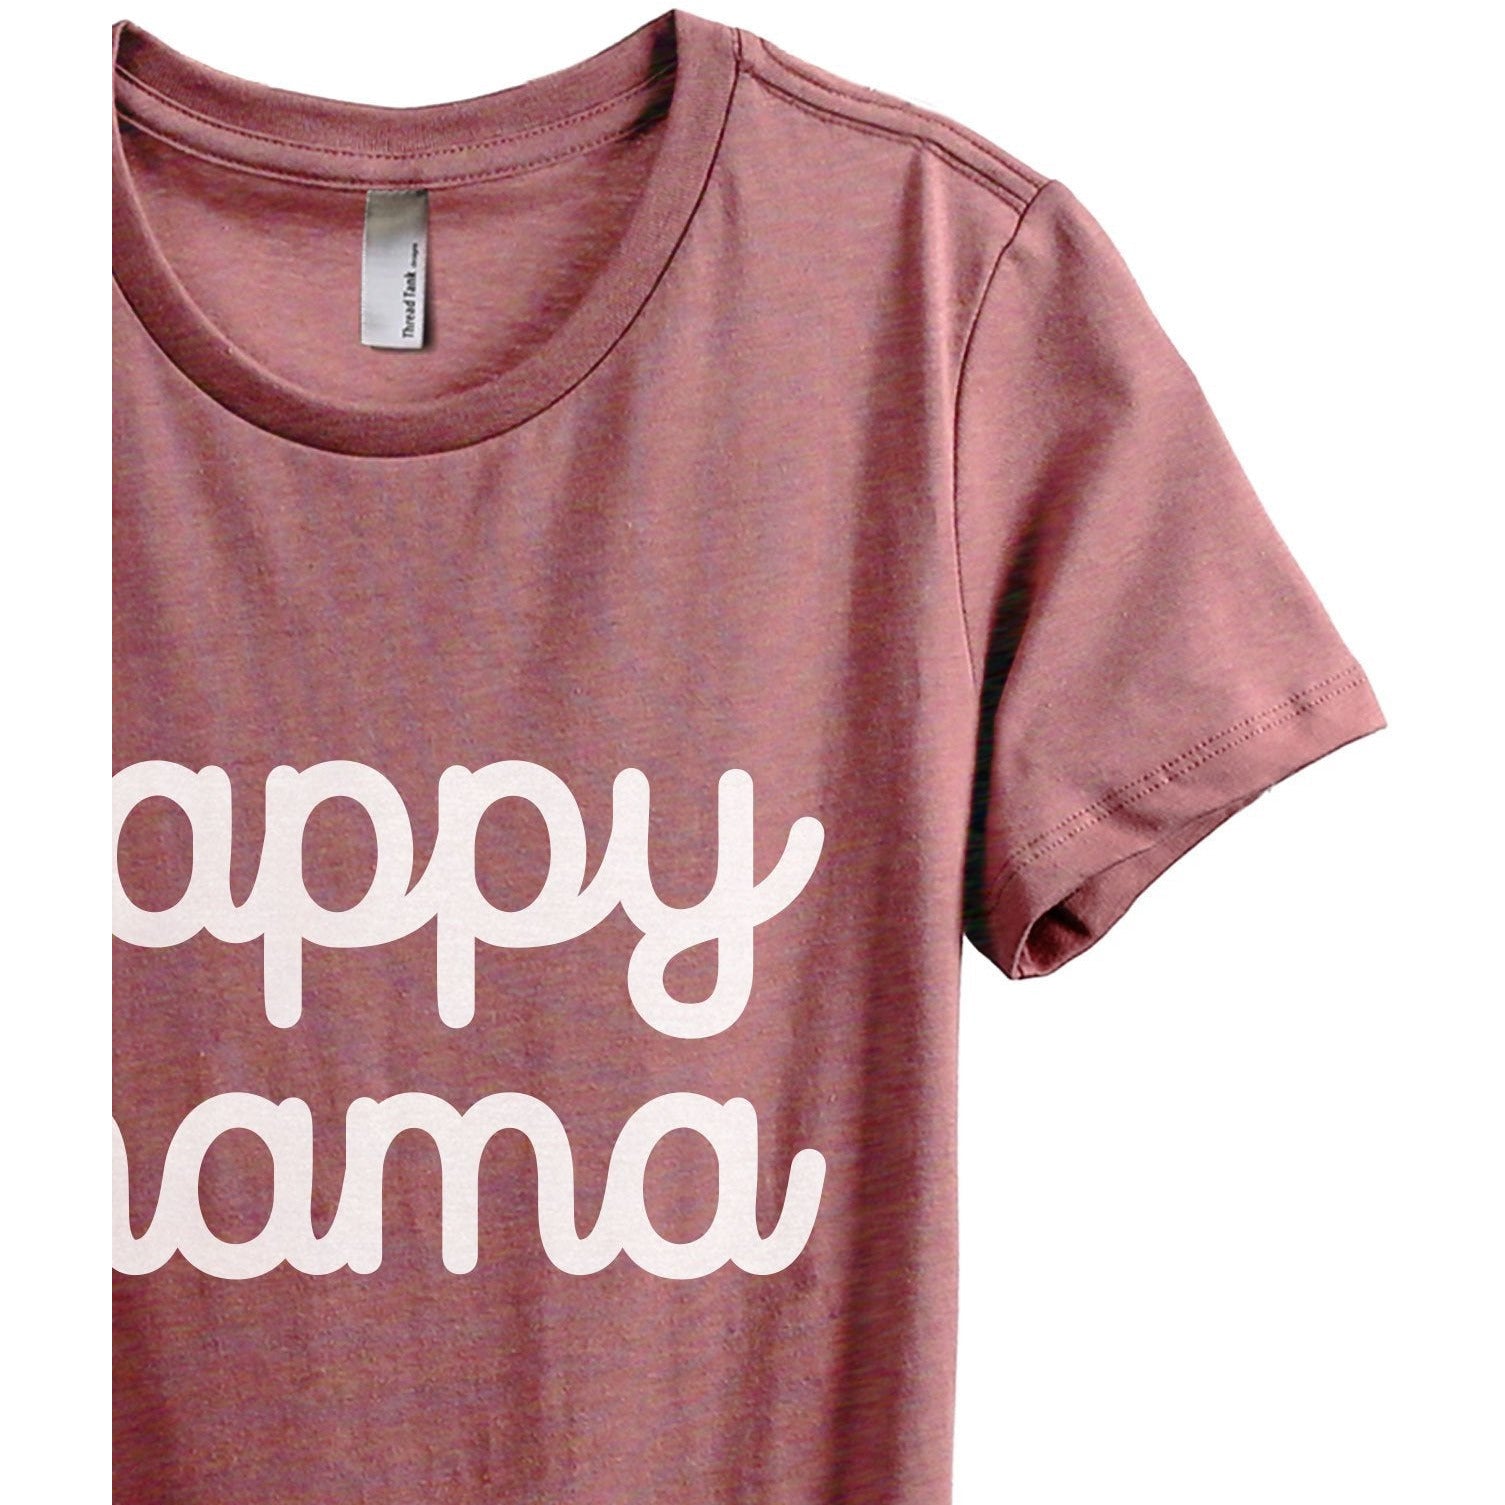 Happy Mama Women's Relaxed Crewneck T-Shirt Top Tee Heather Rouge Zoom Details
